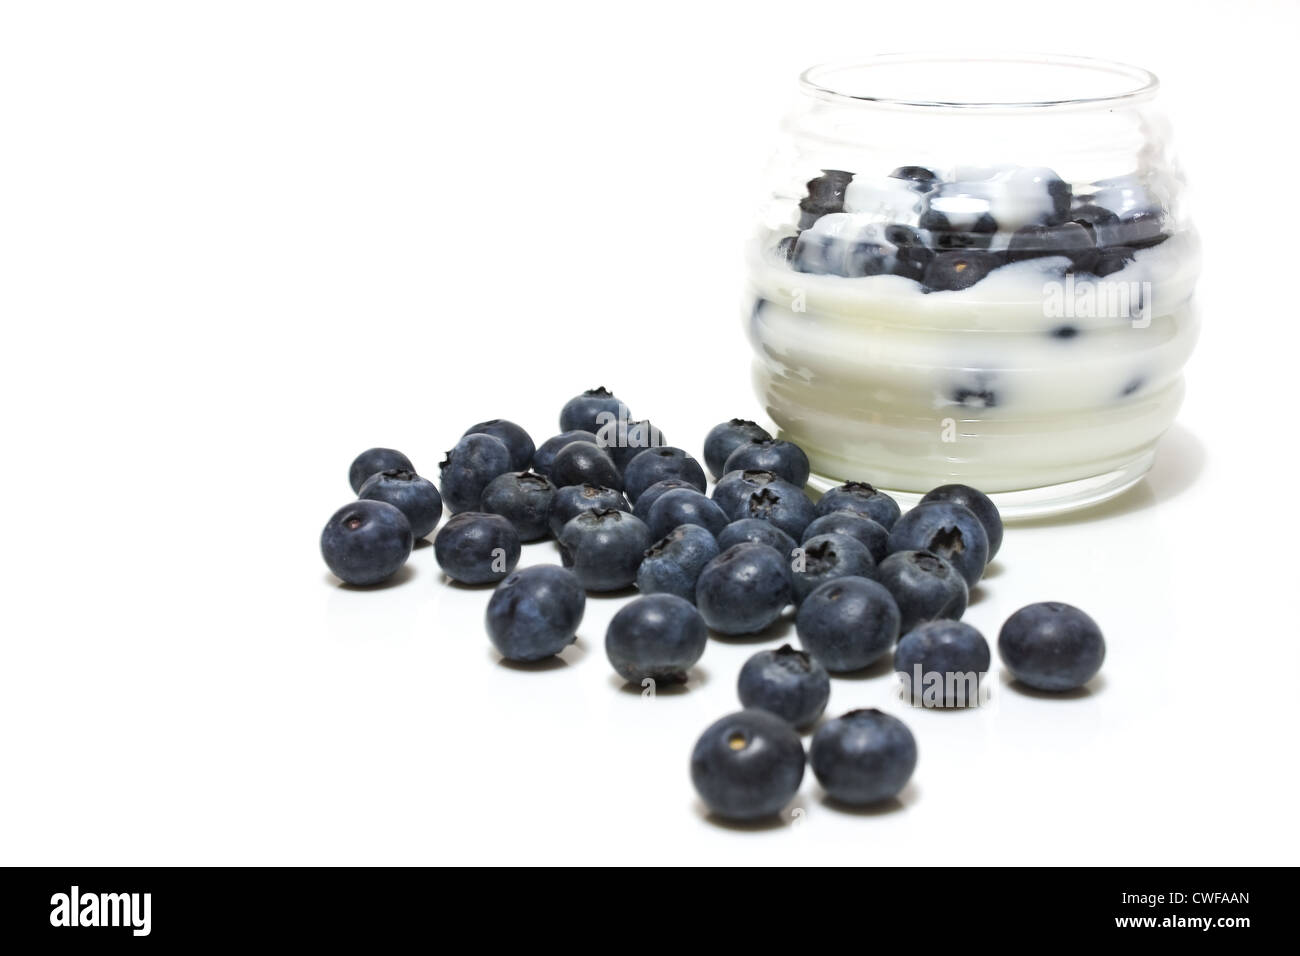 Bowl with yogurt and blueberries isolated on white background. Stock Photo